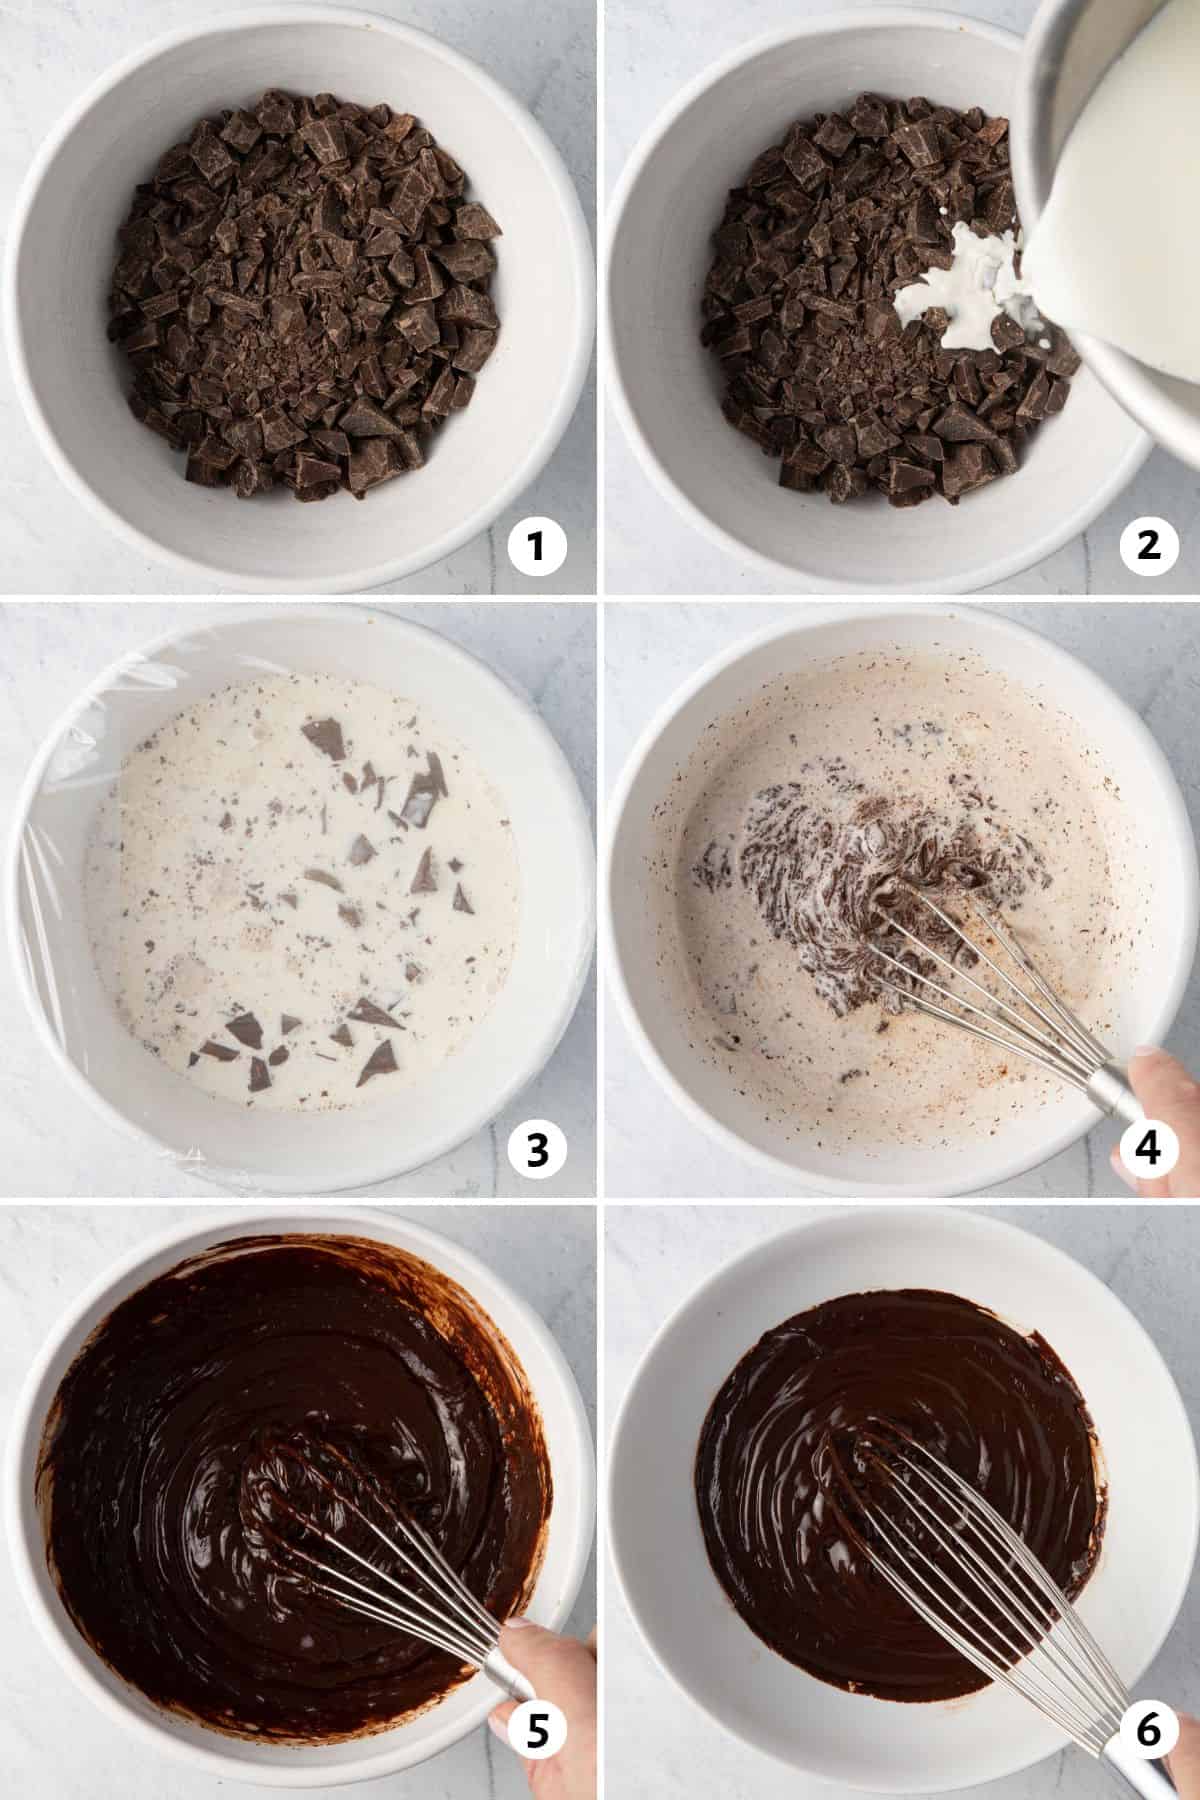 6 image process shot on how to make recipe in a bowl: 1- chopped chocolate in a bowl, 2- warm cream being poured over chocolate, 3- bowl covered with plastic wrap, 4- whisking cream and chocolate, 5- chocolate after being whisked well, 6- ganache after cooled in fridge to show smooth thick consisitency.